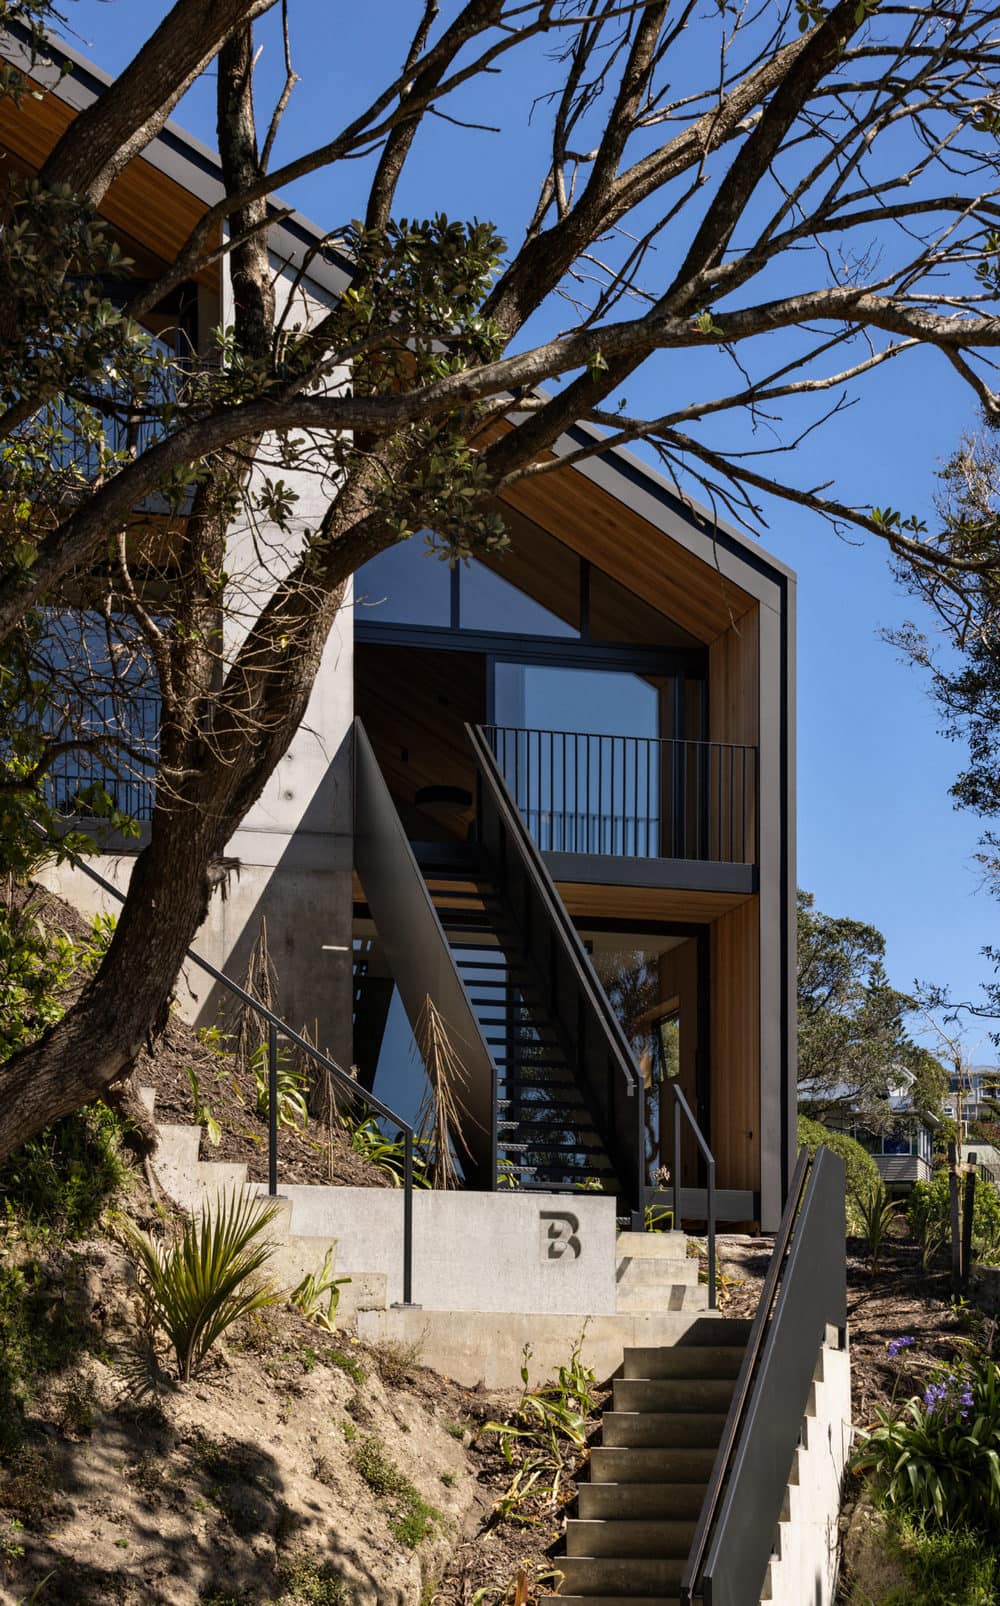 Party Wall Houses / Patchwork Architecture